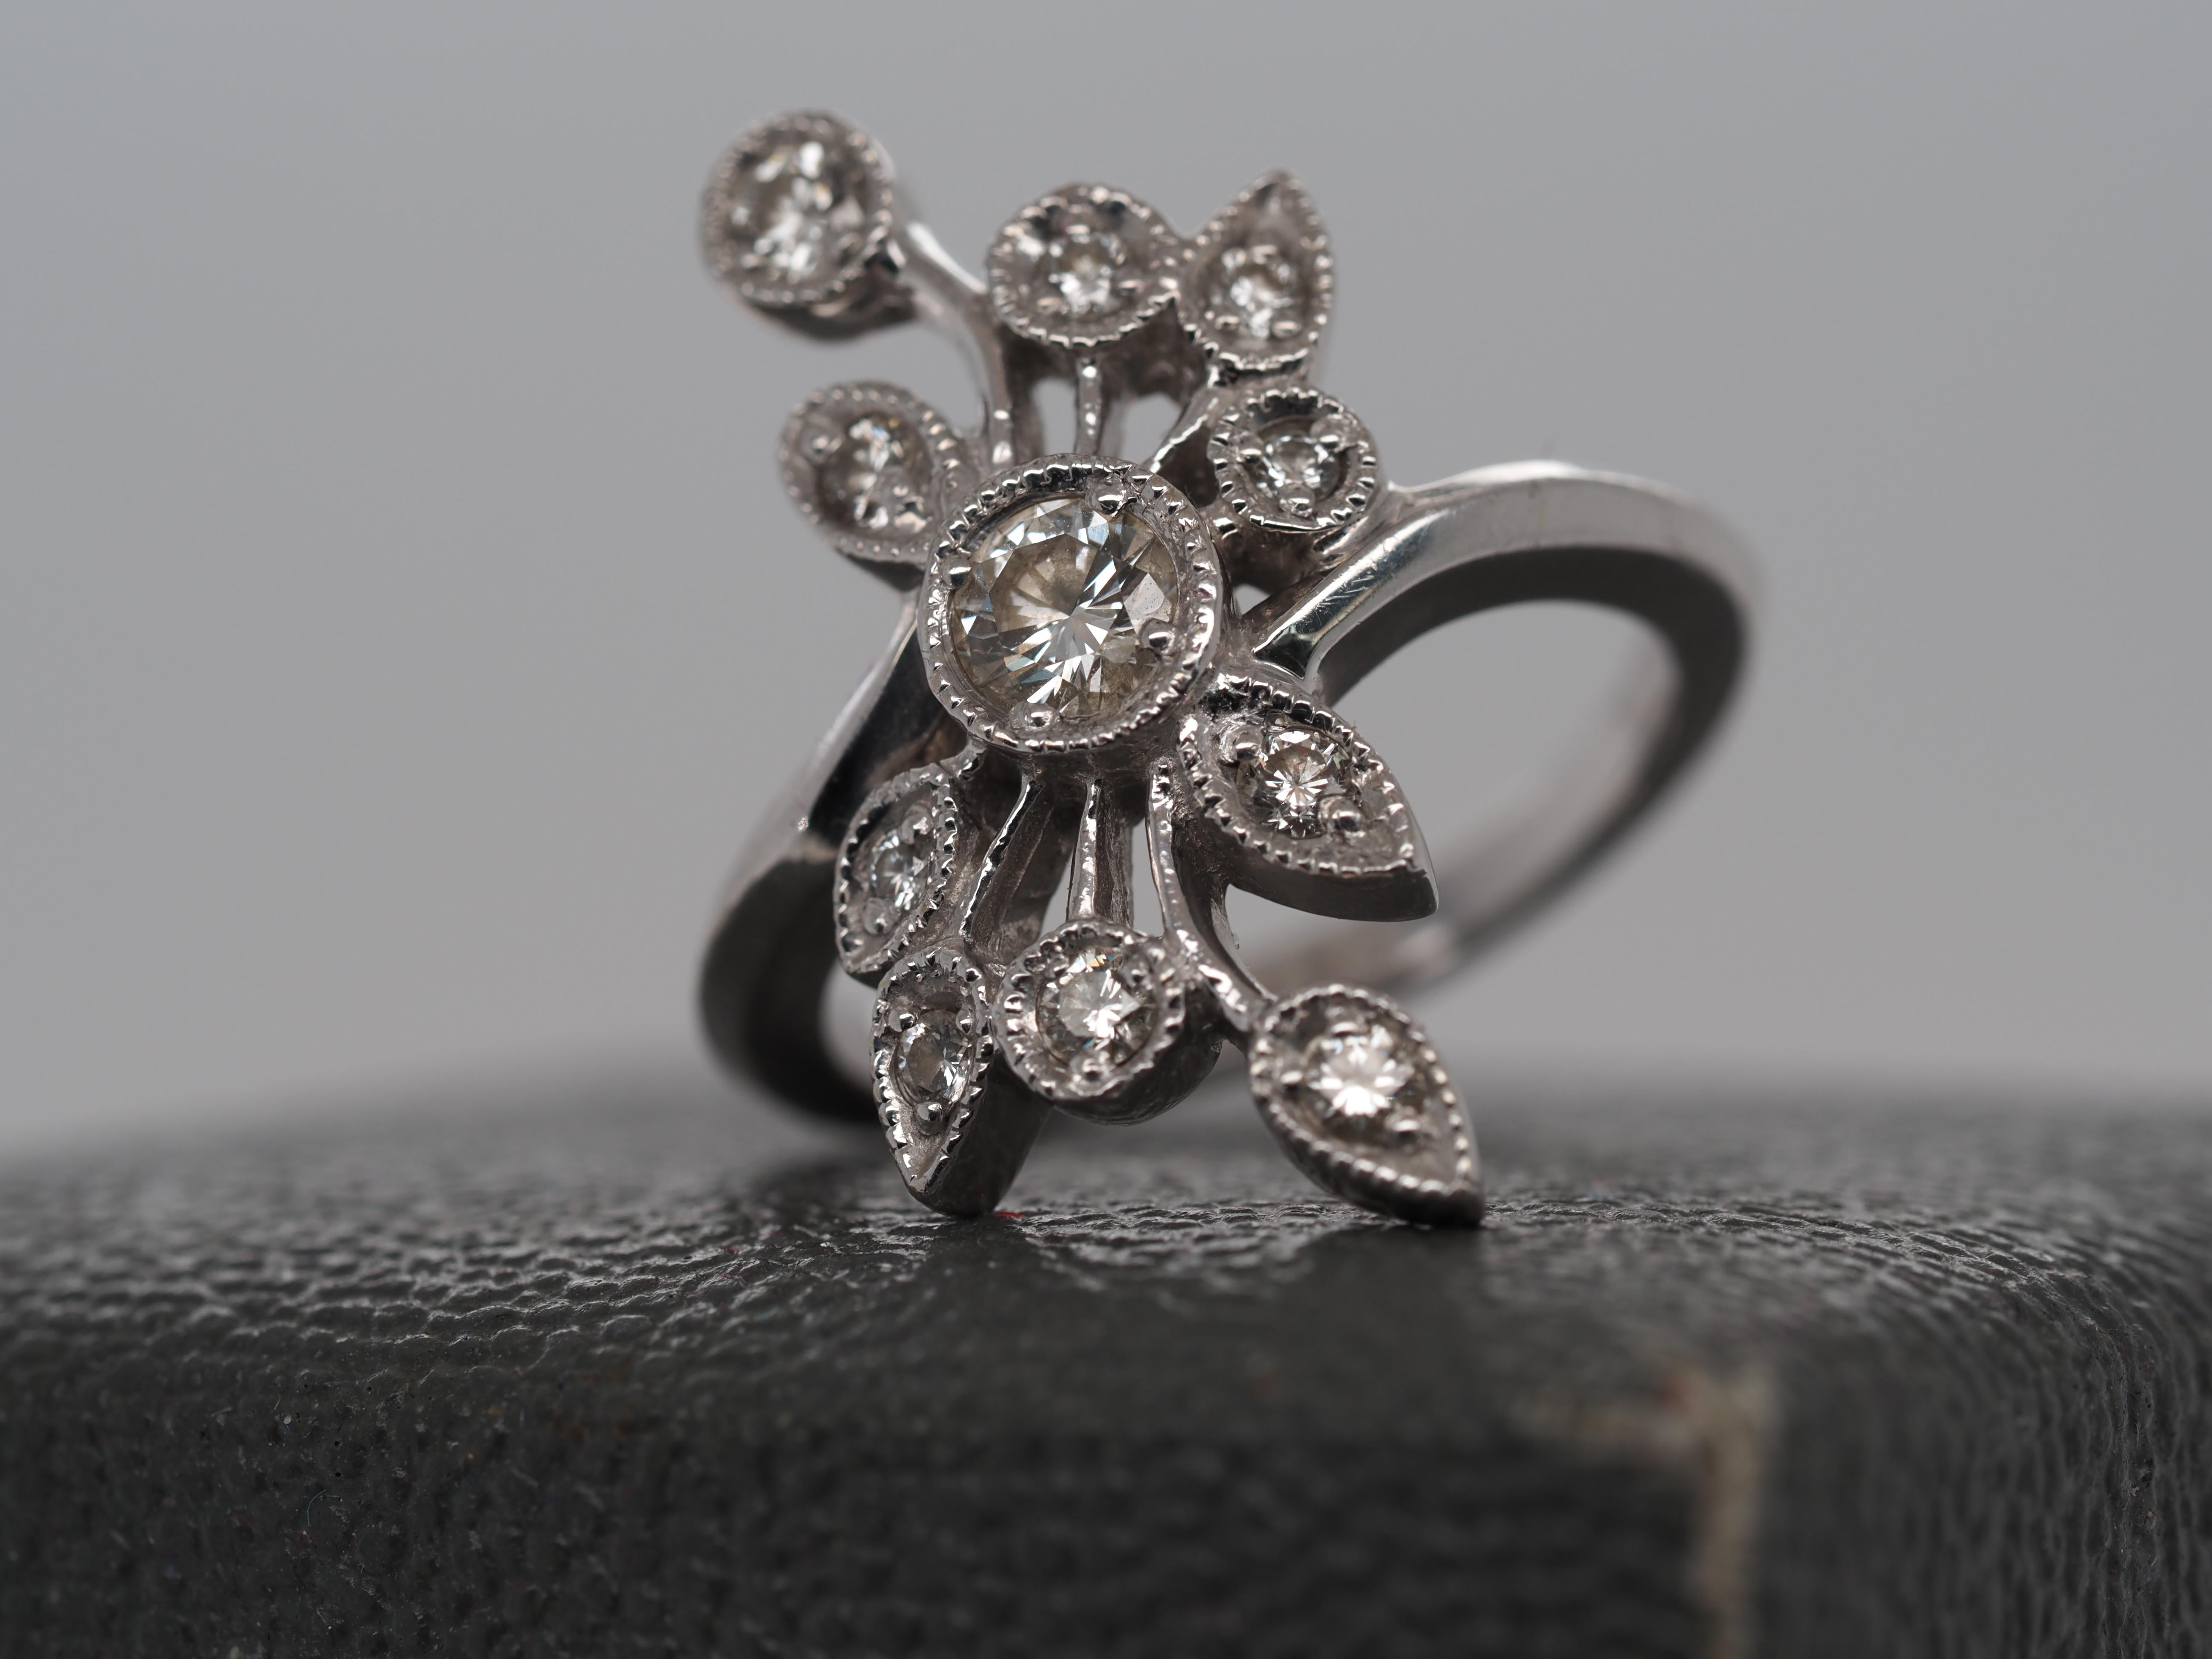 Item Details:
Ring Size: 5.25
Metal Type: 14k White Gold [Hallmarked, and Tested]
Weight: 5.8 grams
Diamond Details: .55ct total weight, G-H Color, VS Clarity, Round Brilliant (Natural)
Band Width: 1.8 mm
Condition: Excellent